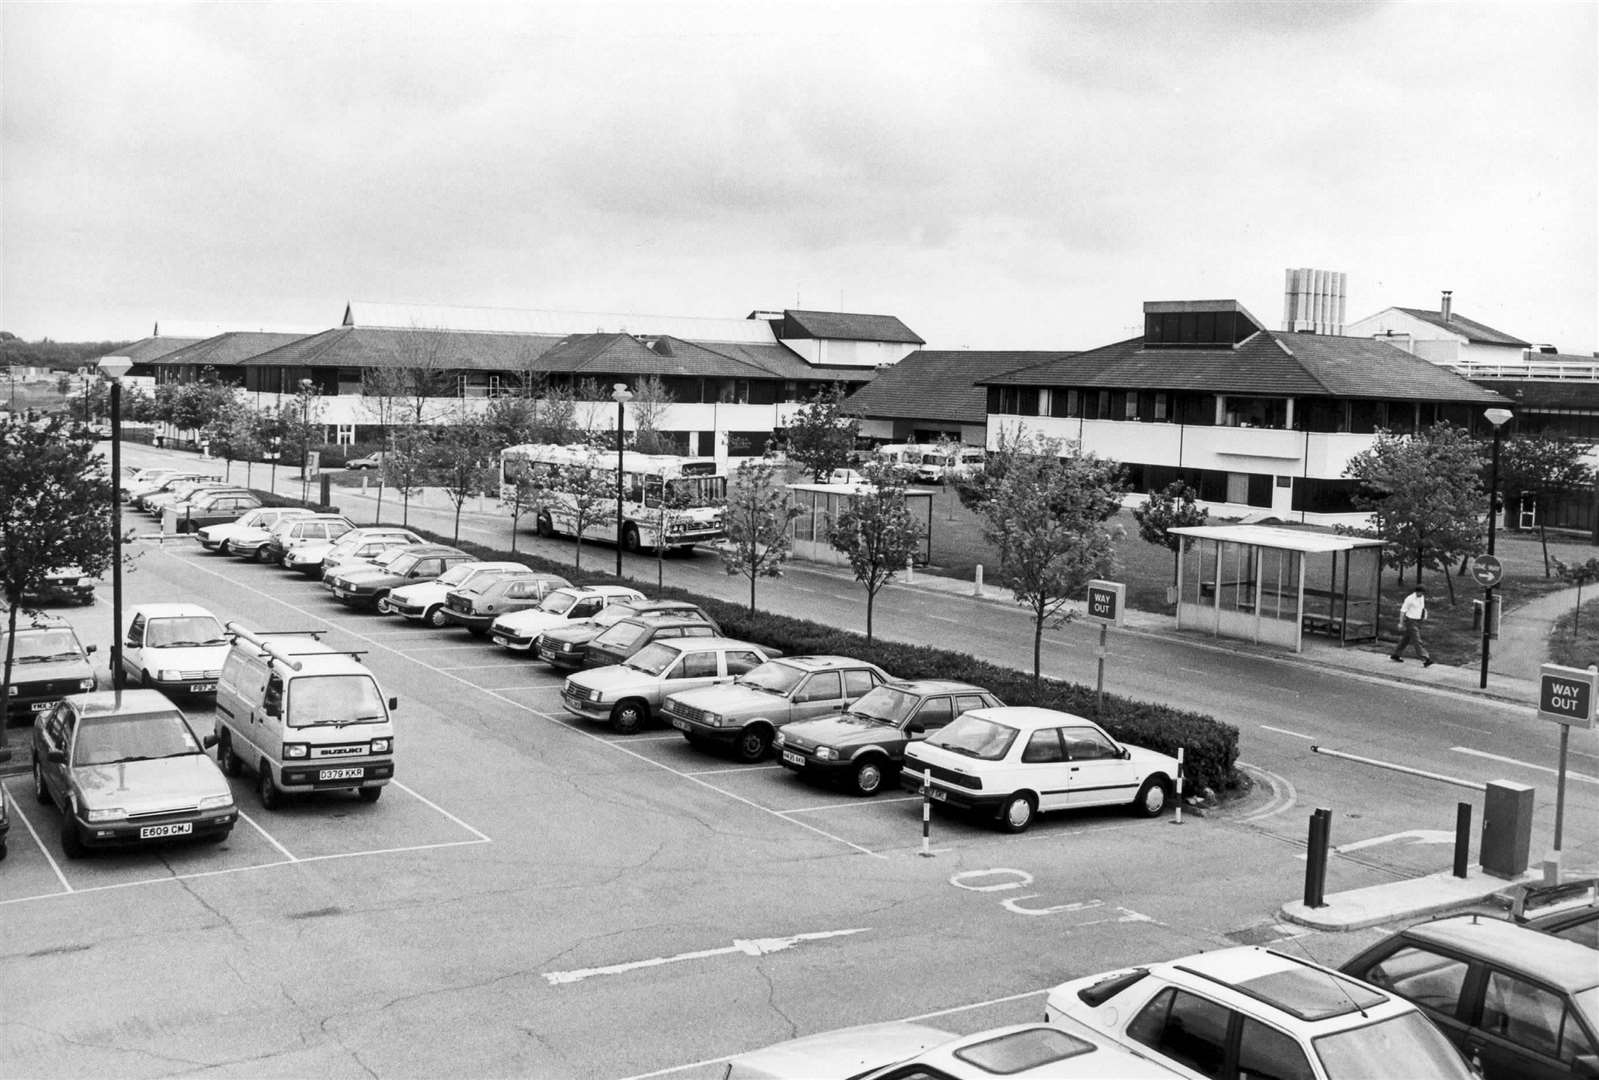 Maidstone Hospital in May 1991